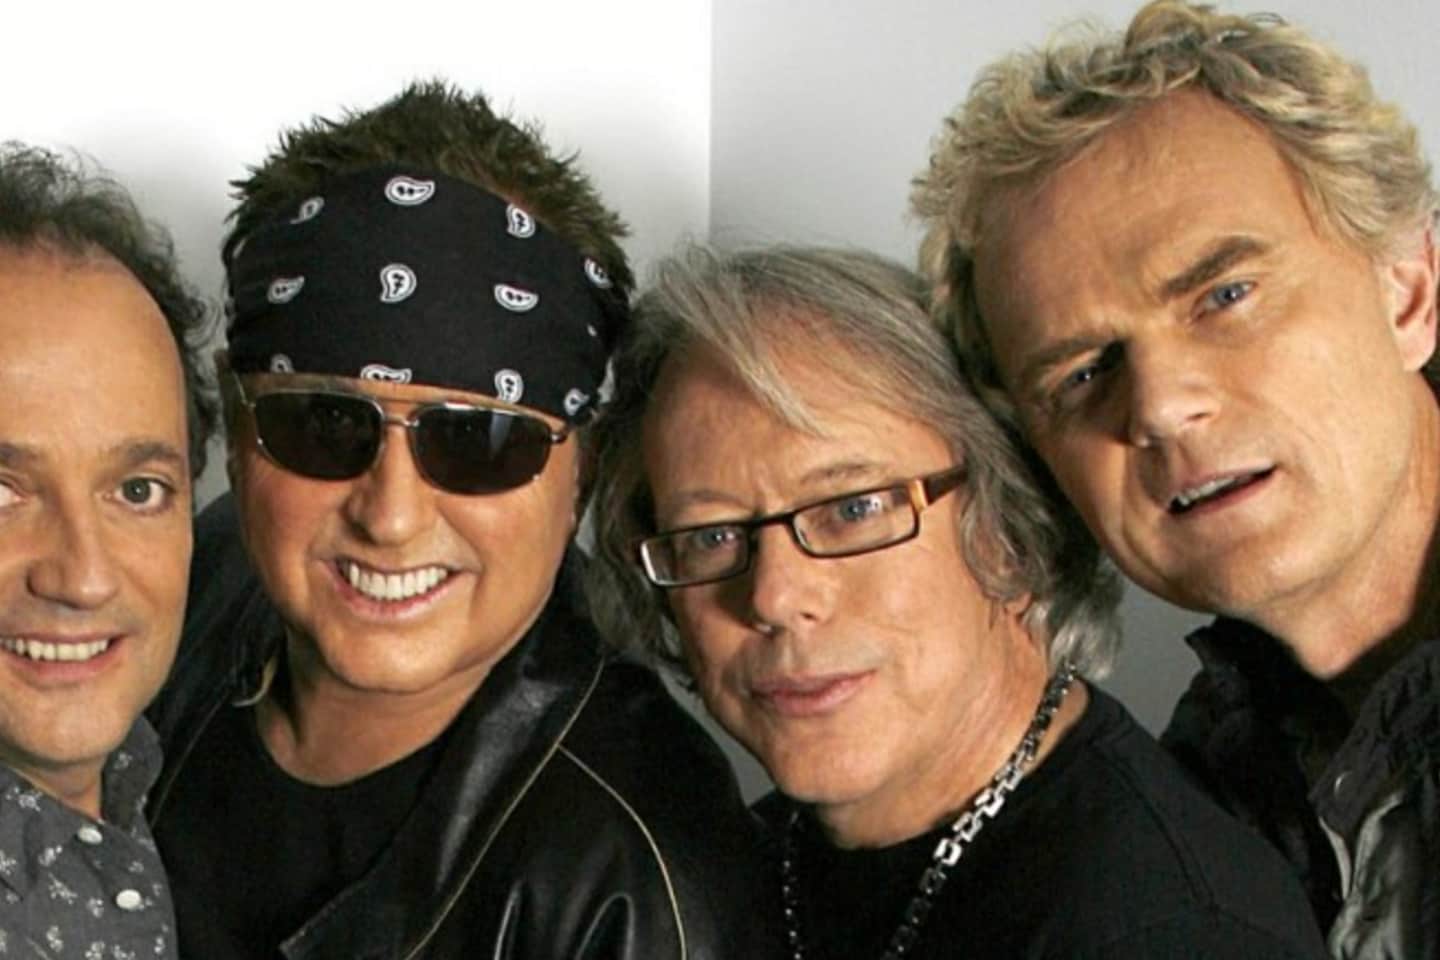 loverboy get lucky tour dates